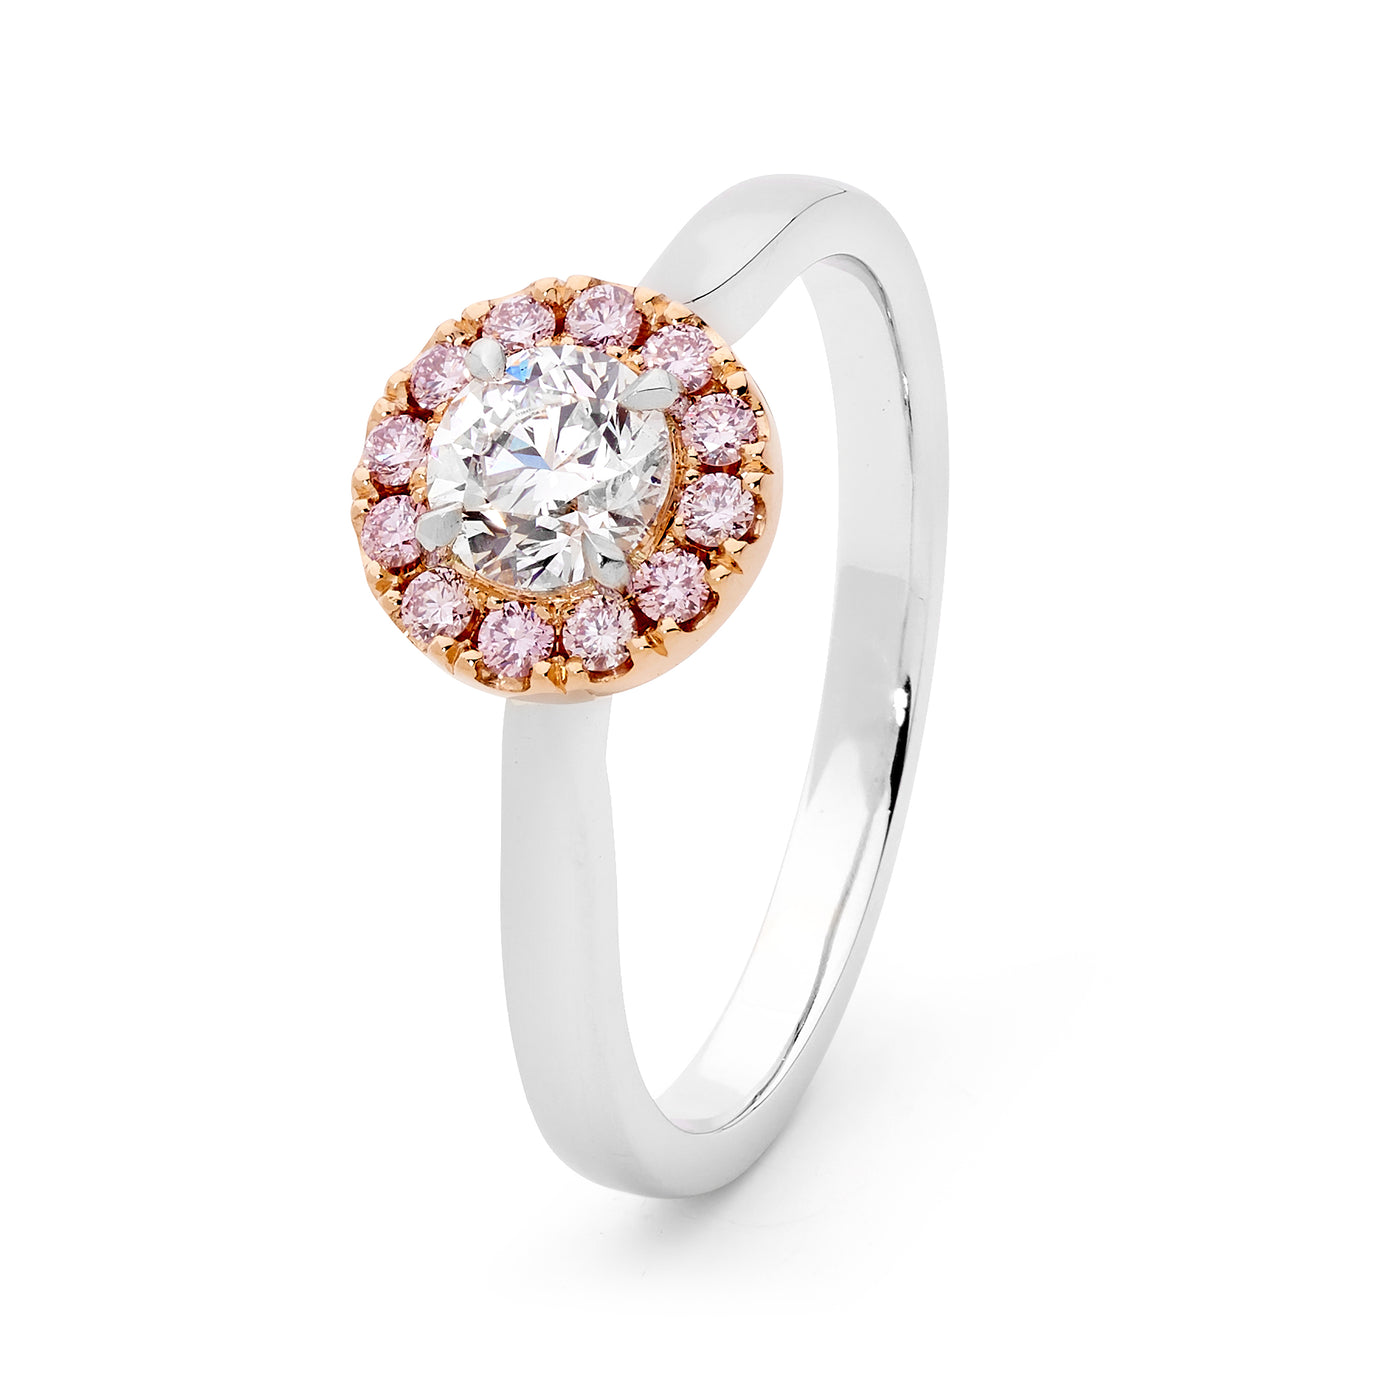 Ellendale 18Ct White And Rose Gold Argyle White And Pink Diamond Halo Engagemnt Ring